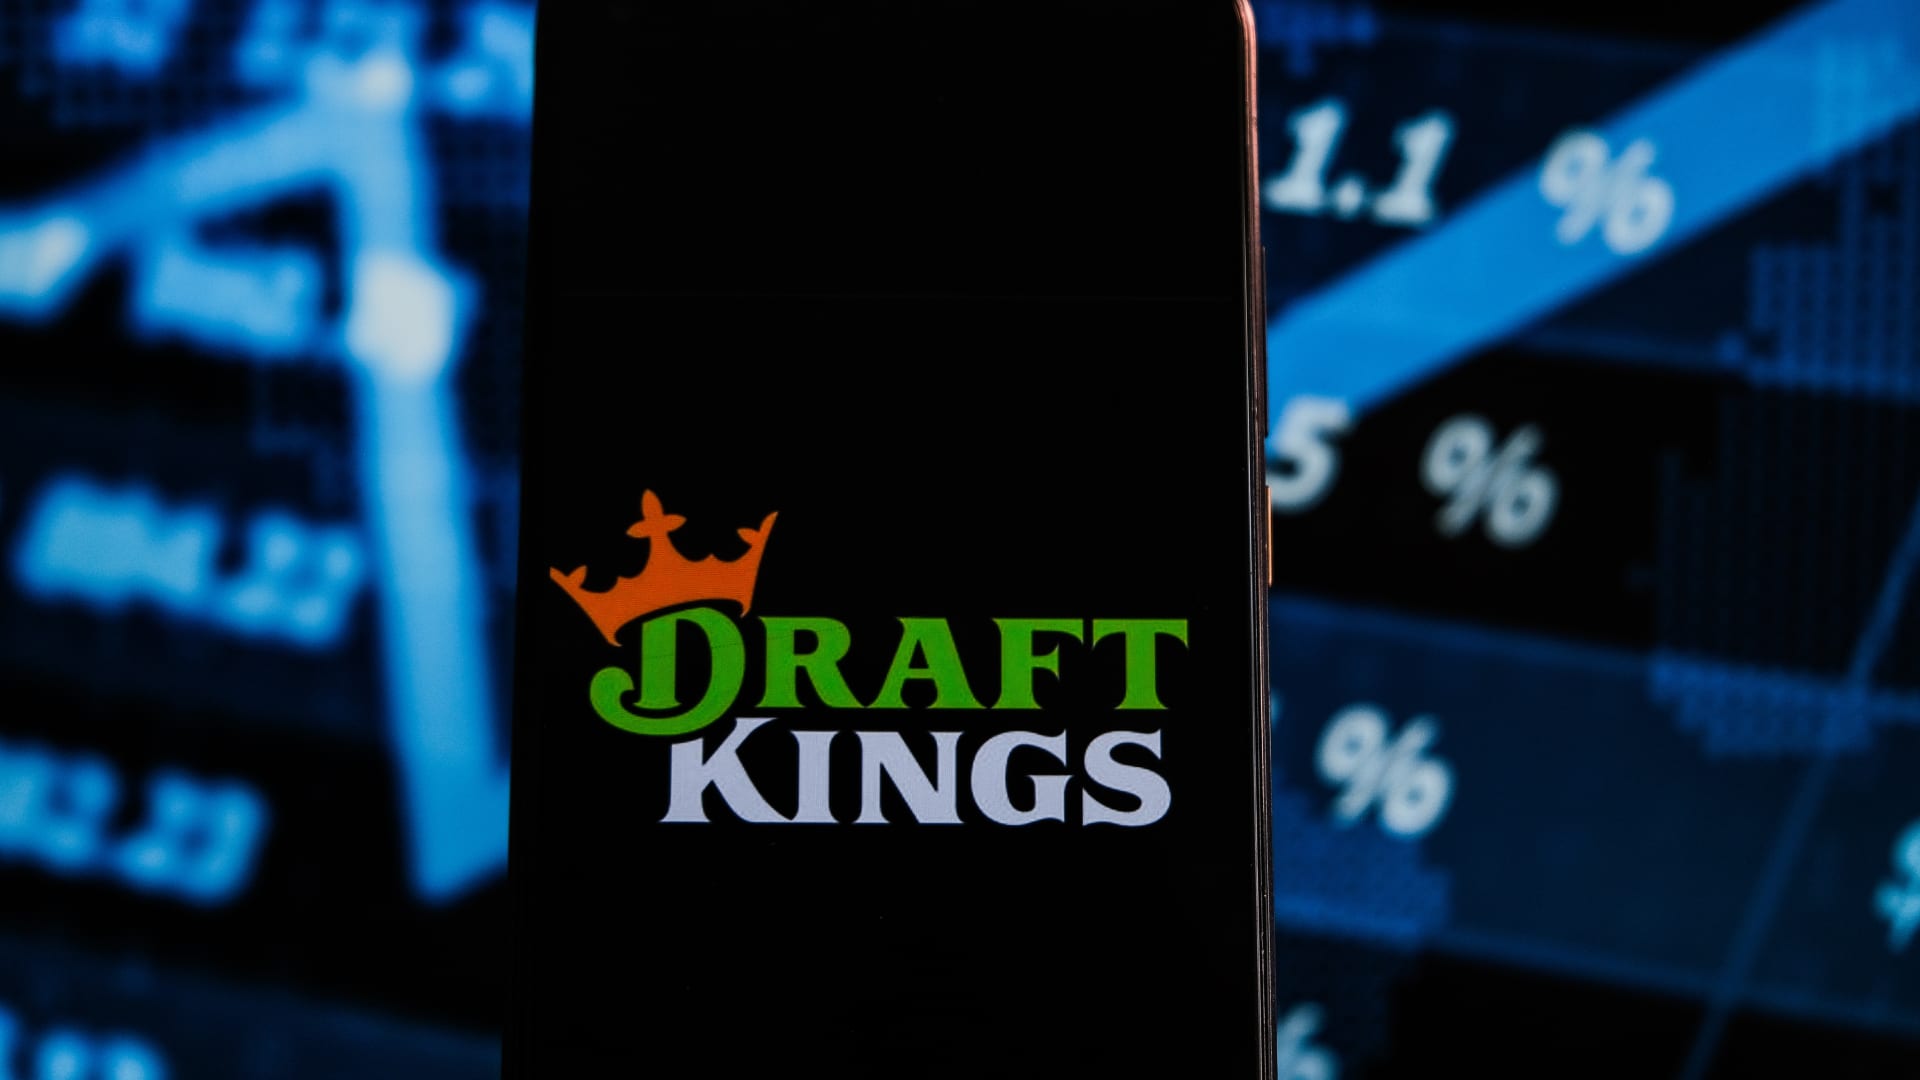 Buy DraftKings as sports betting shows ‘staying power,’ Barclays says